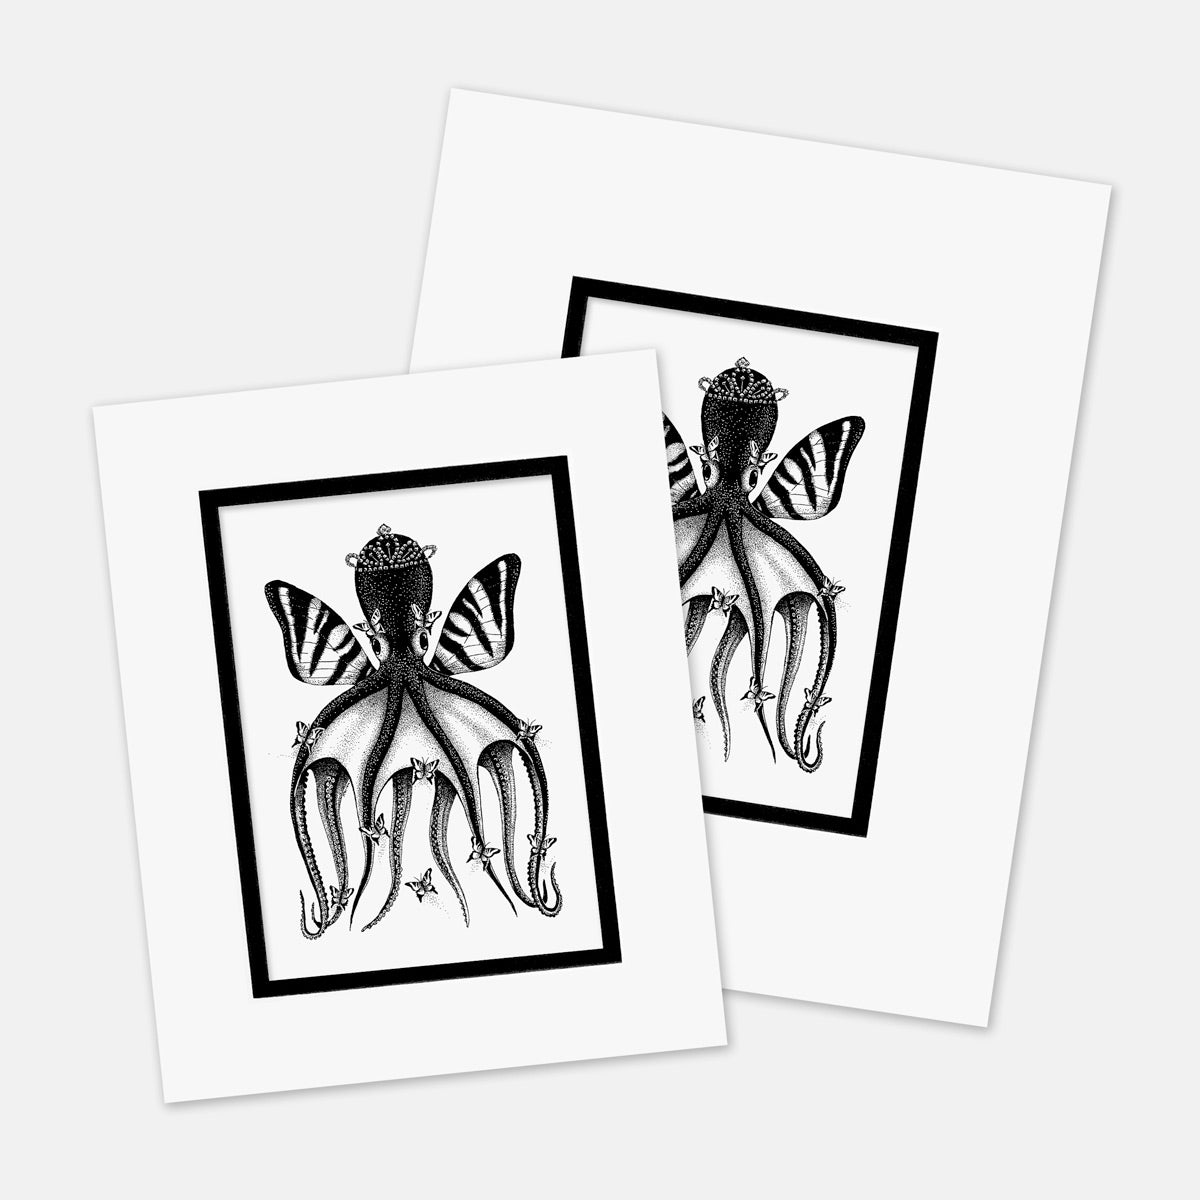 "Pulpo Madre" : Mat Boards that Original and Limited Edition Prints get shipped in